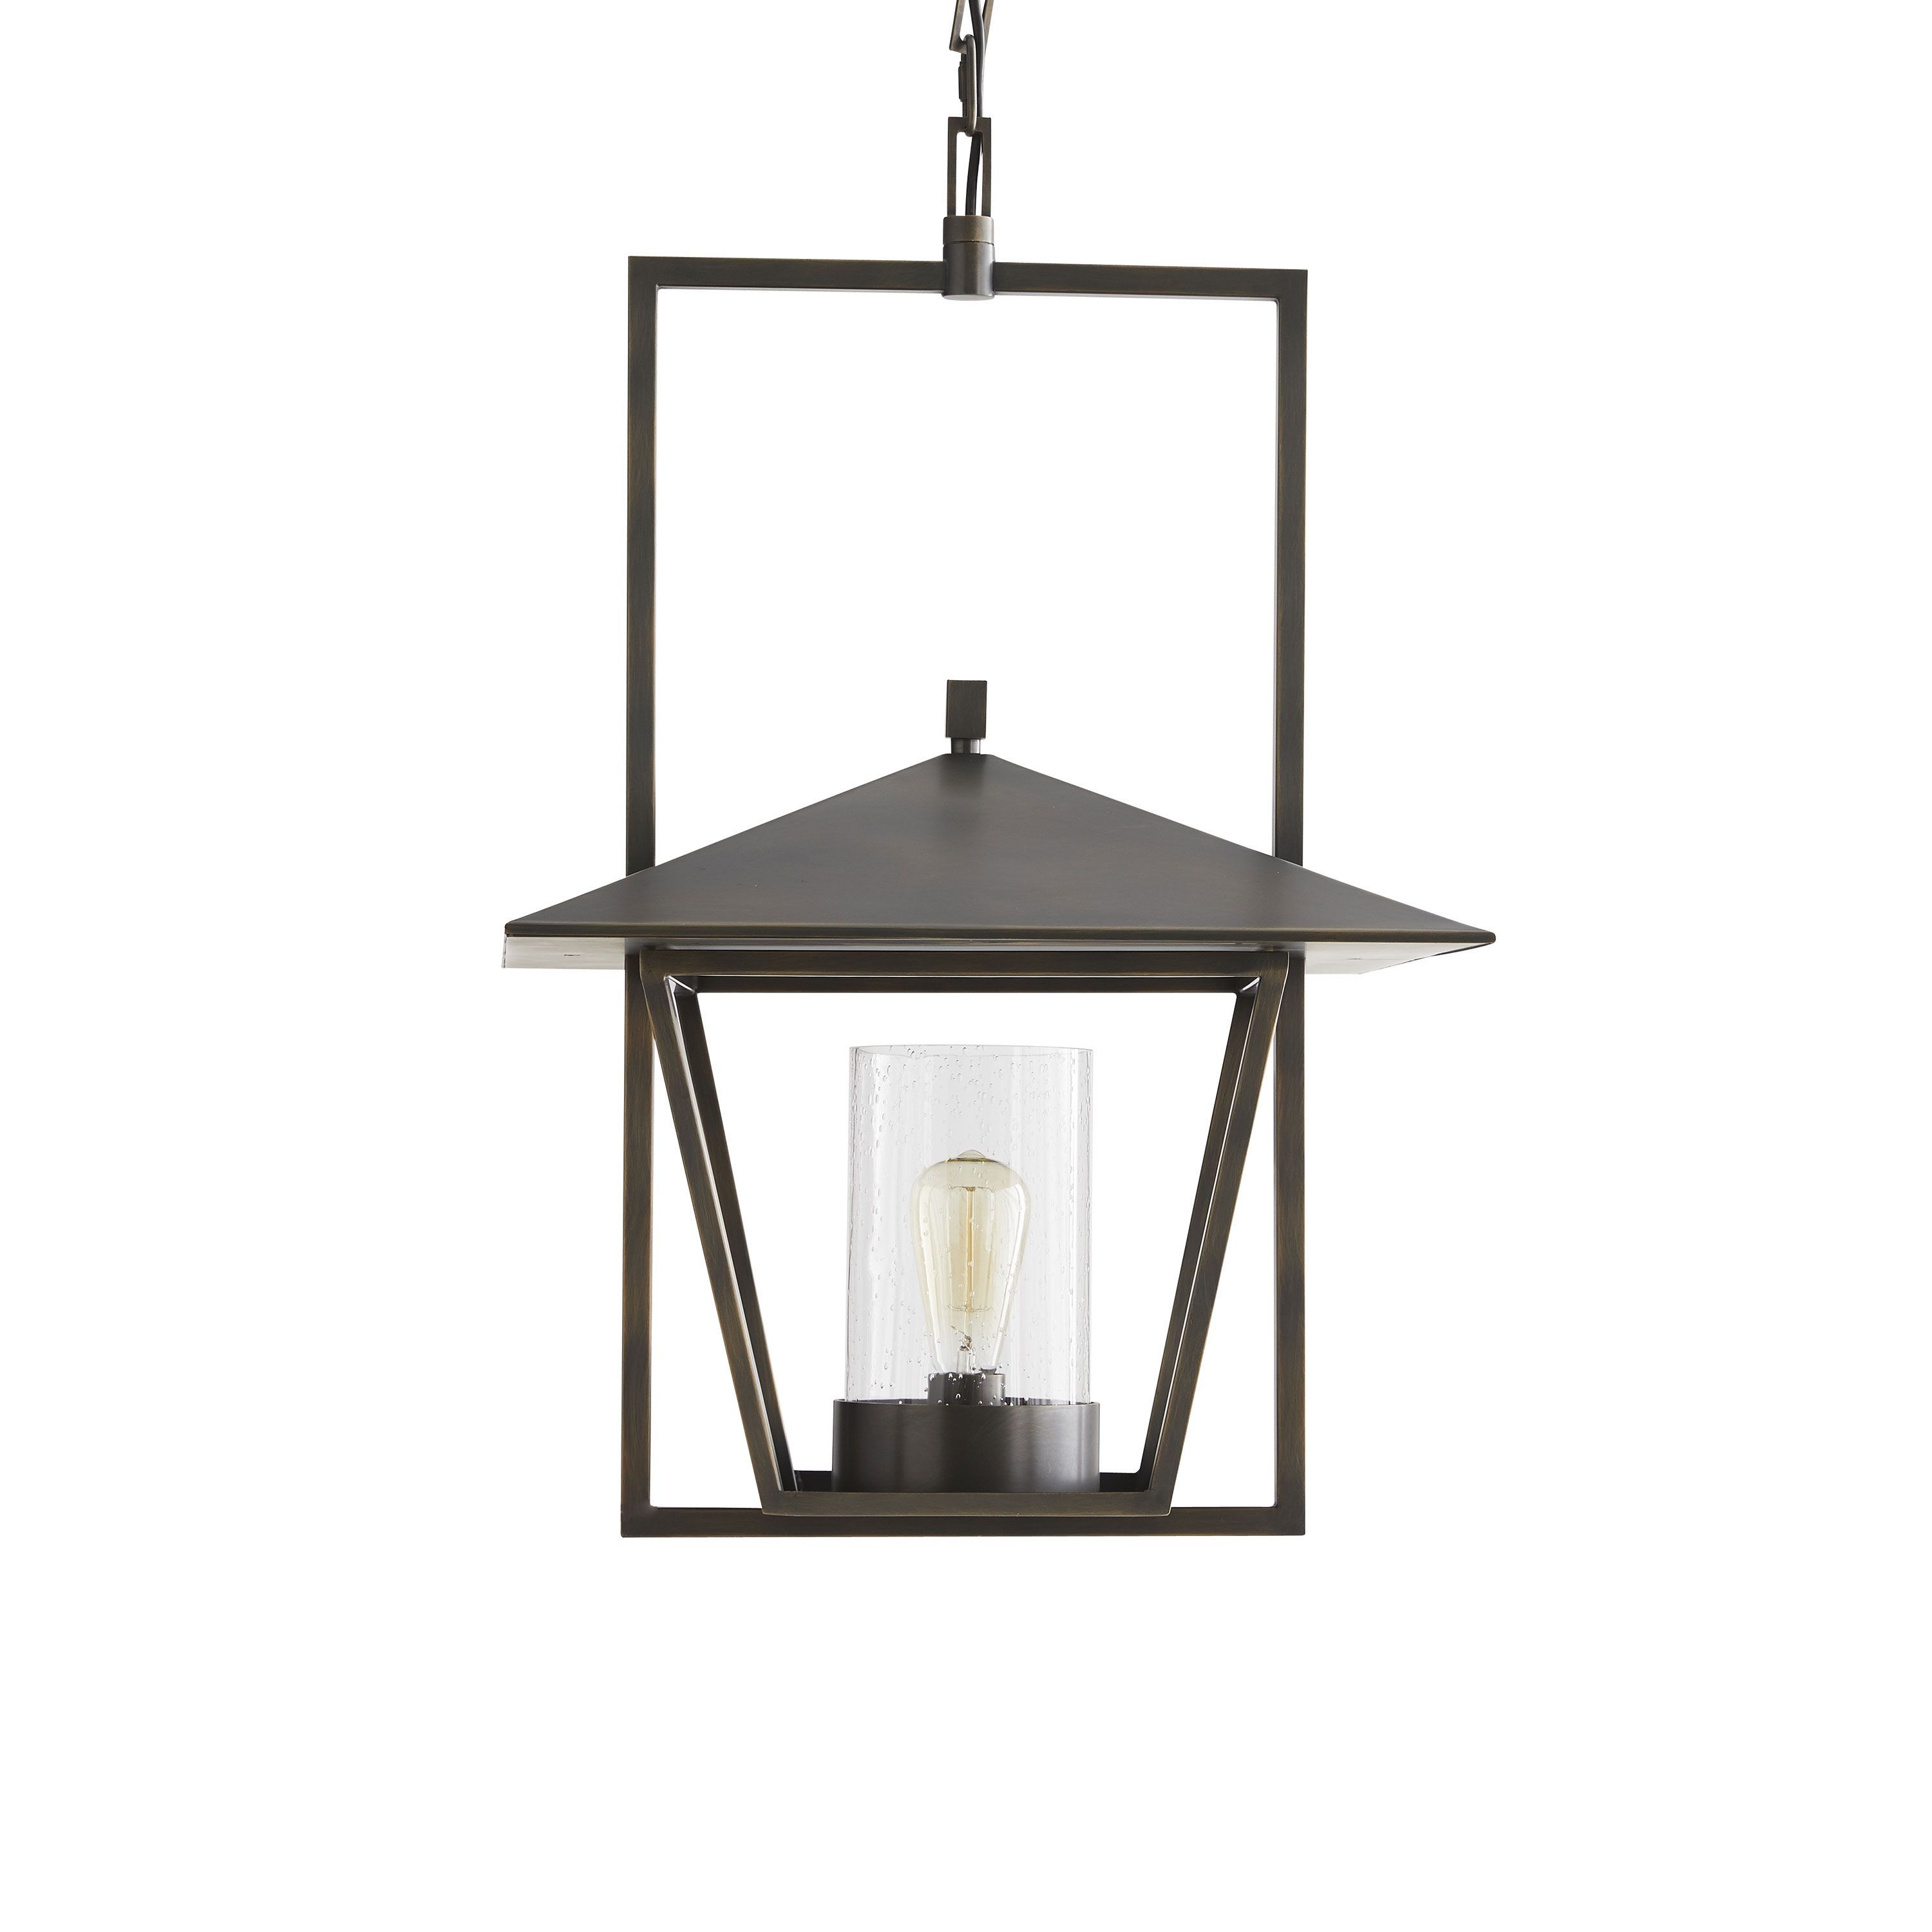 Hanging lamp TEMPLE by Arteriors